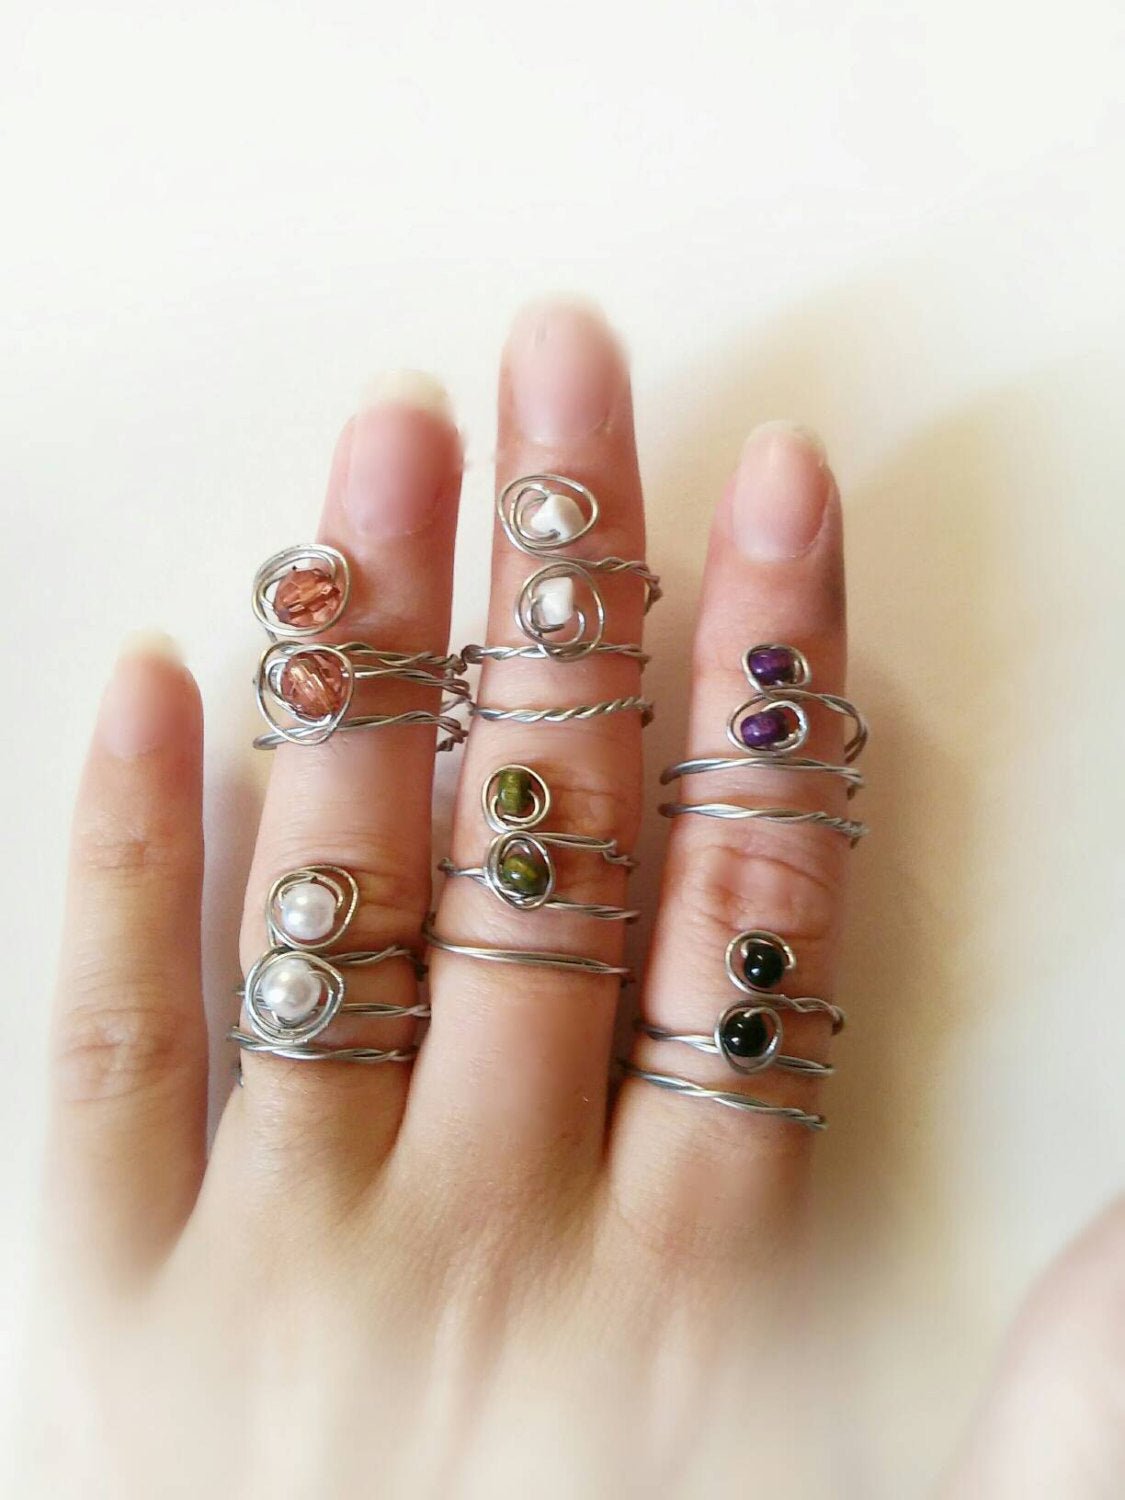 2 Boho stone stackable ring set/double stone ring/hippie ring/silver boho ring set/hippie stone ring/adjustable ring/boho ring gift for her